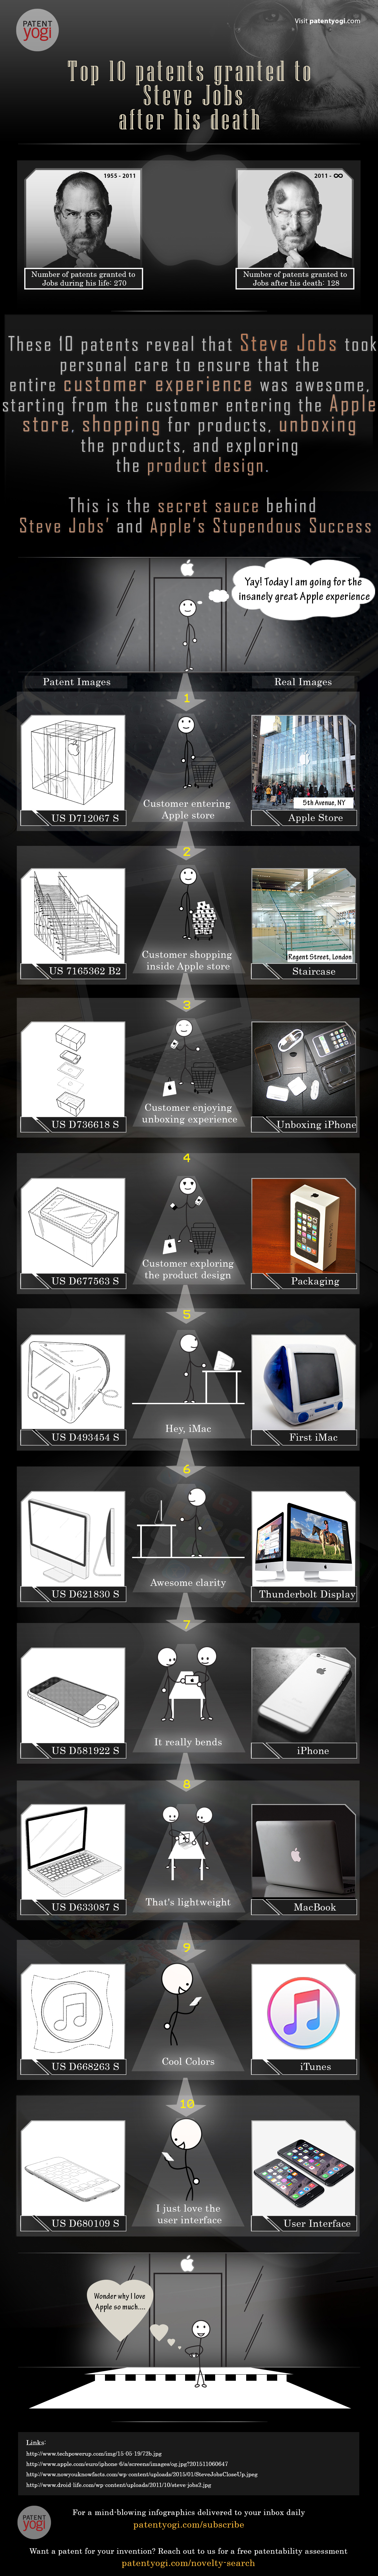 PatentYogi_Infographic_Top 10 patents granted to Steve Jobs after his death